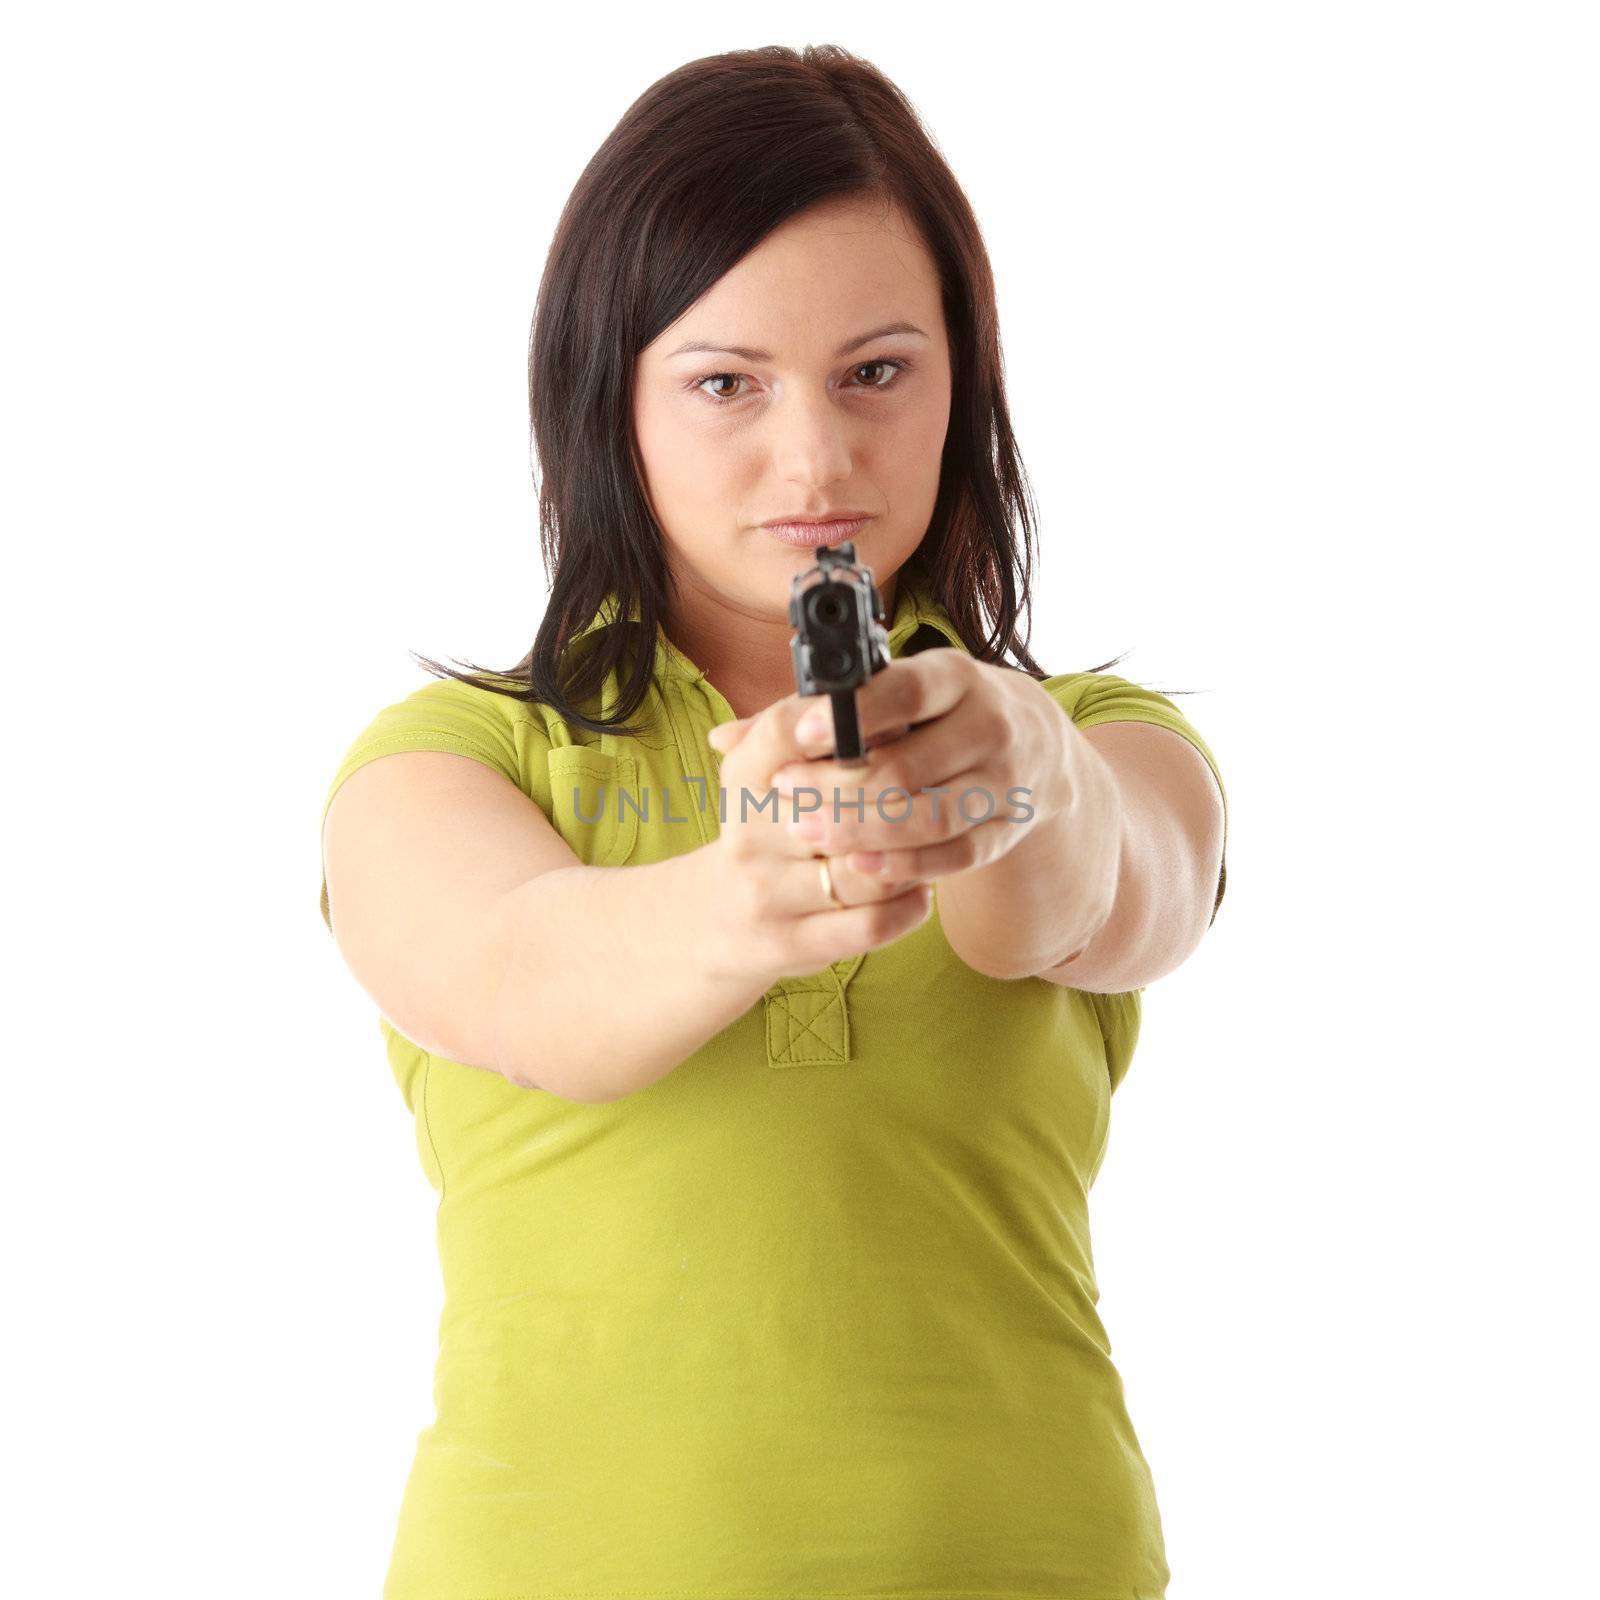 Angry woman with gun isolated on white